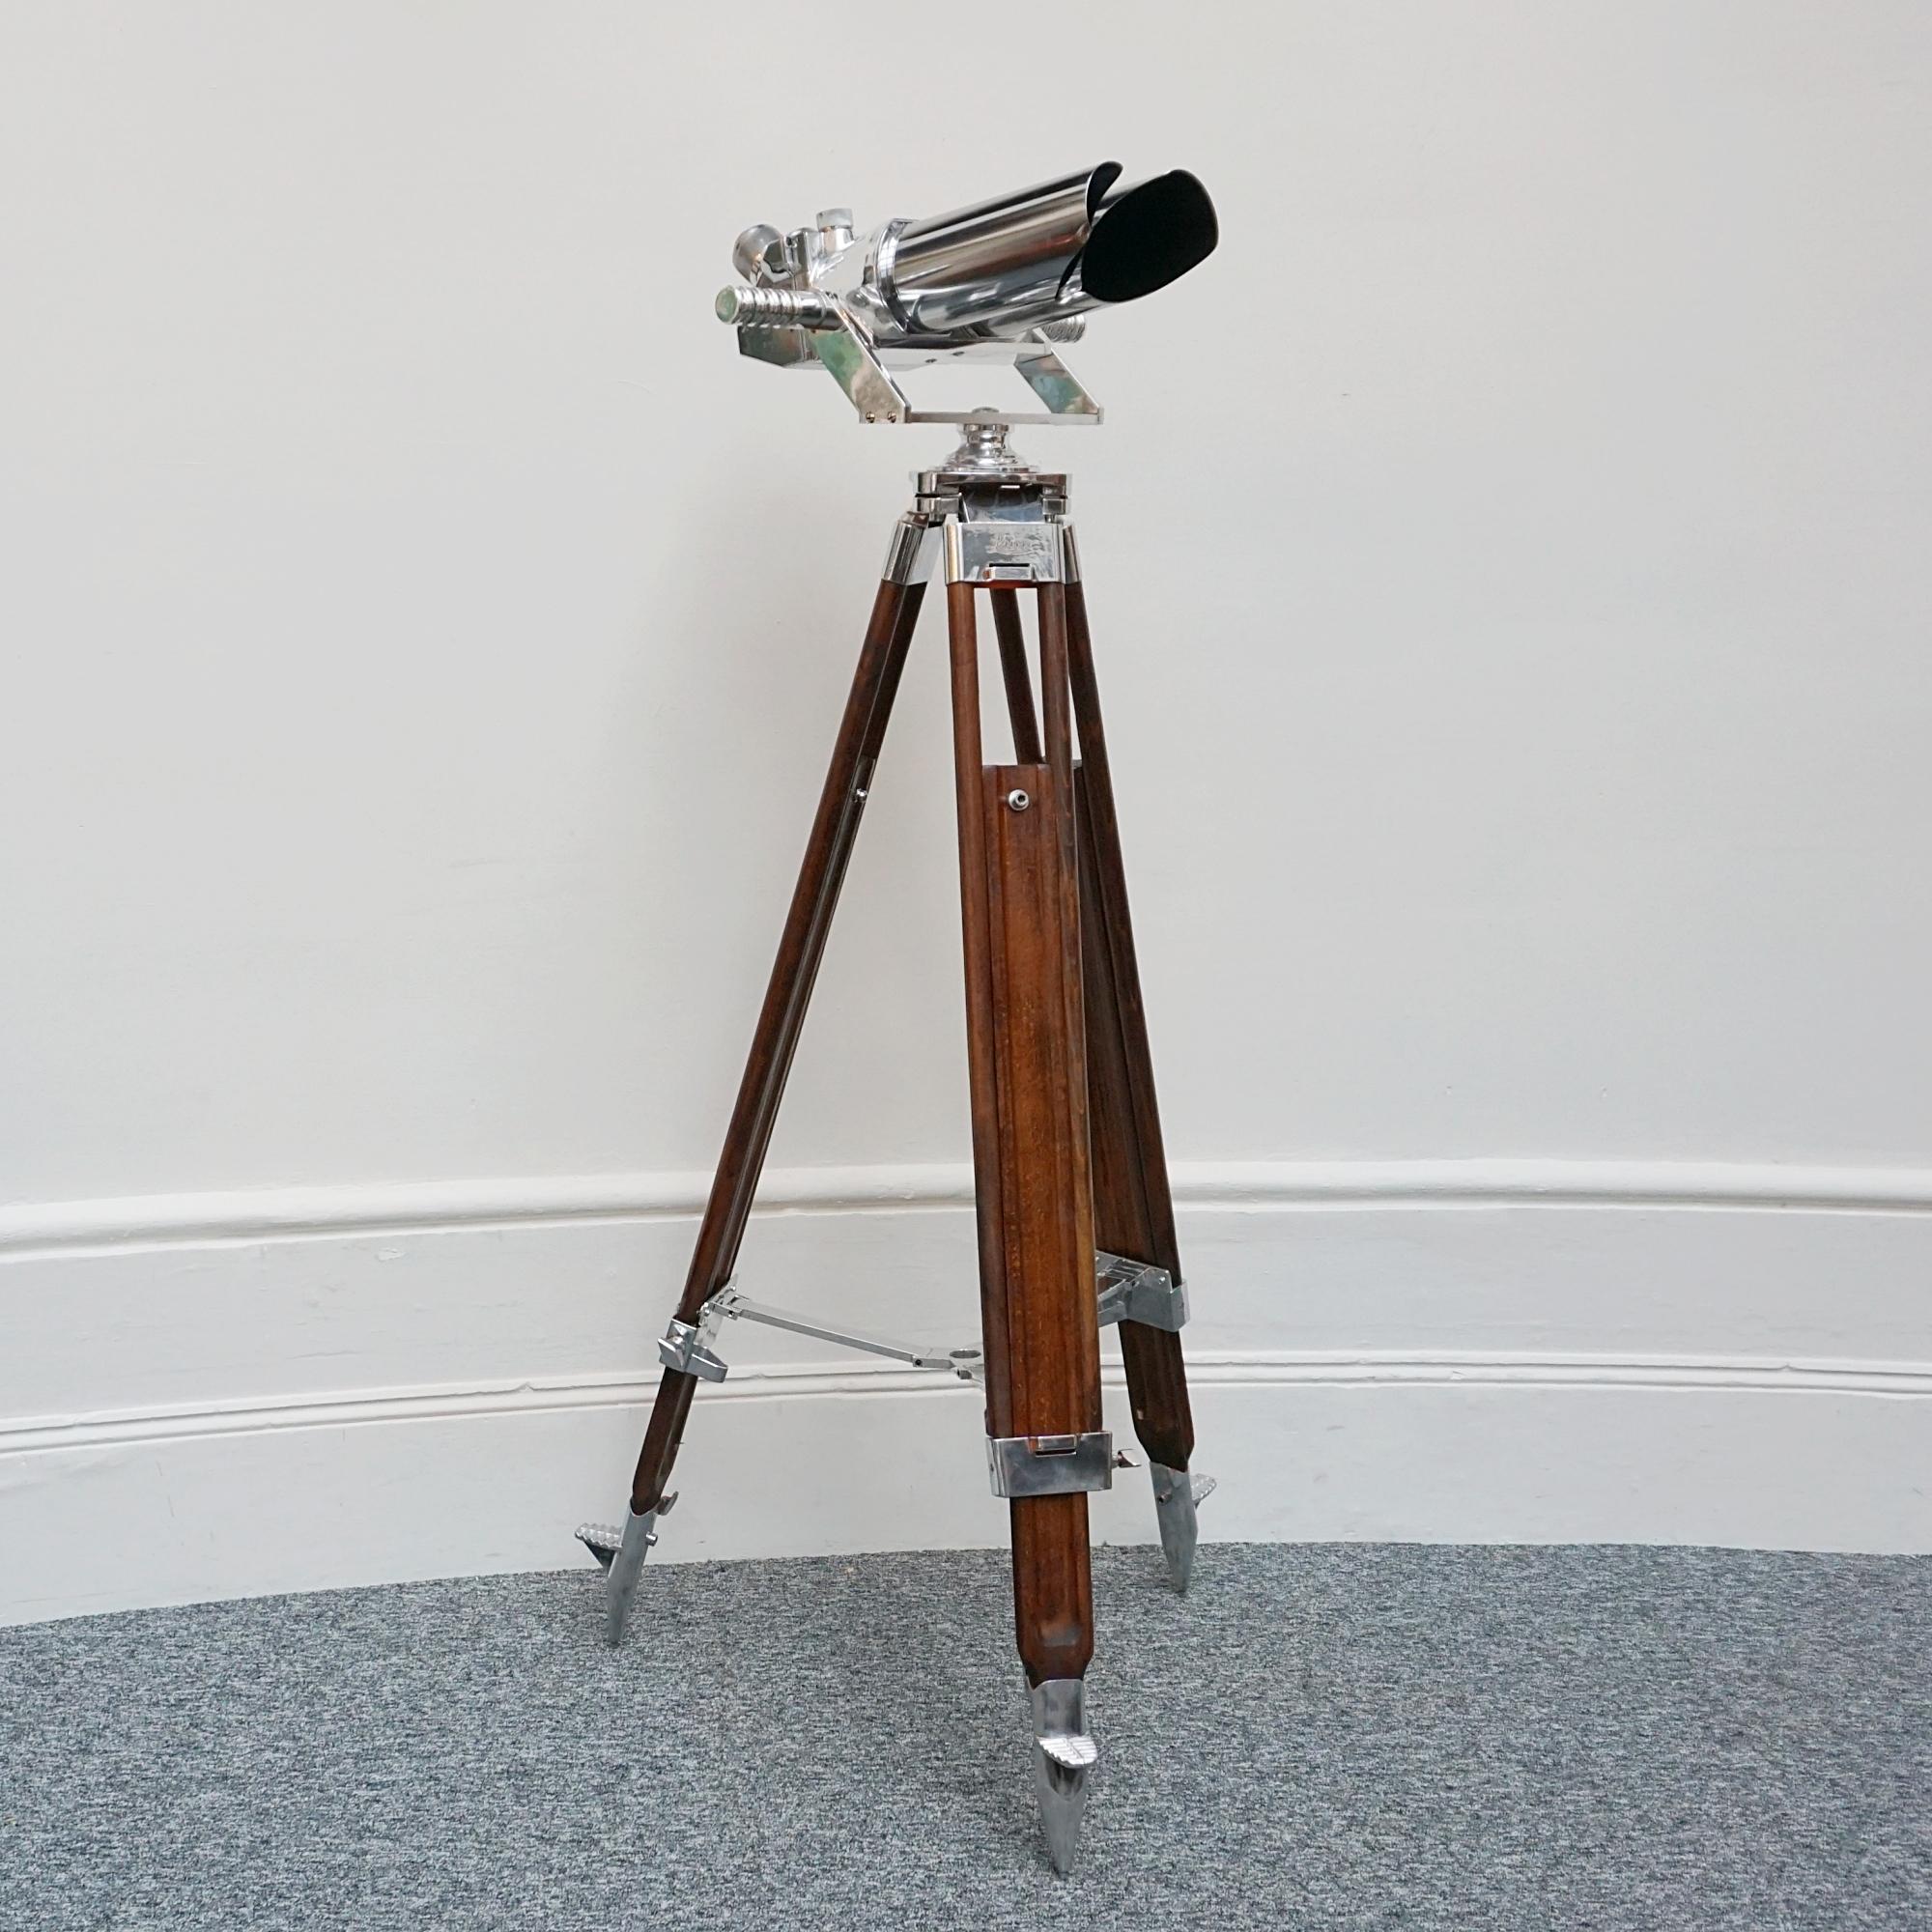 A pair of 10x80 observation binoculars designed by Emil Busch Optical Industries of Rathenow. WW11 naval binoculars with eyepieces set at 45 degrees. Set on a later extending wood and chromed metal stand, with chromed conical feet. This design was